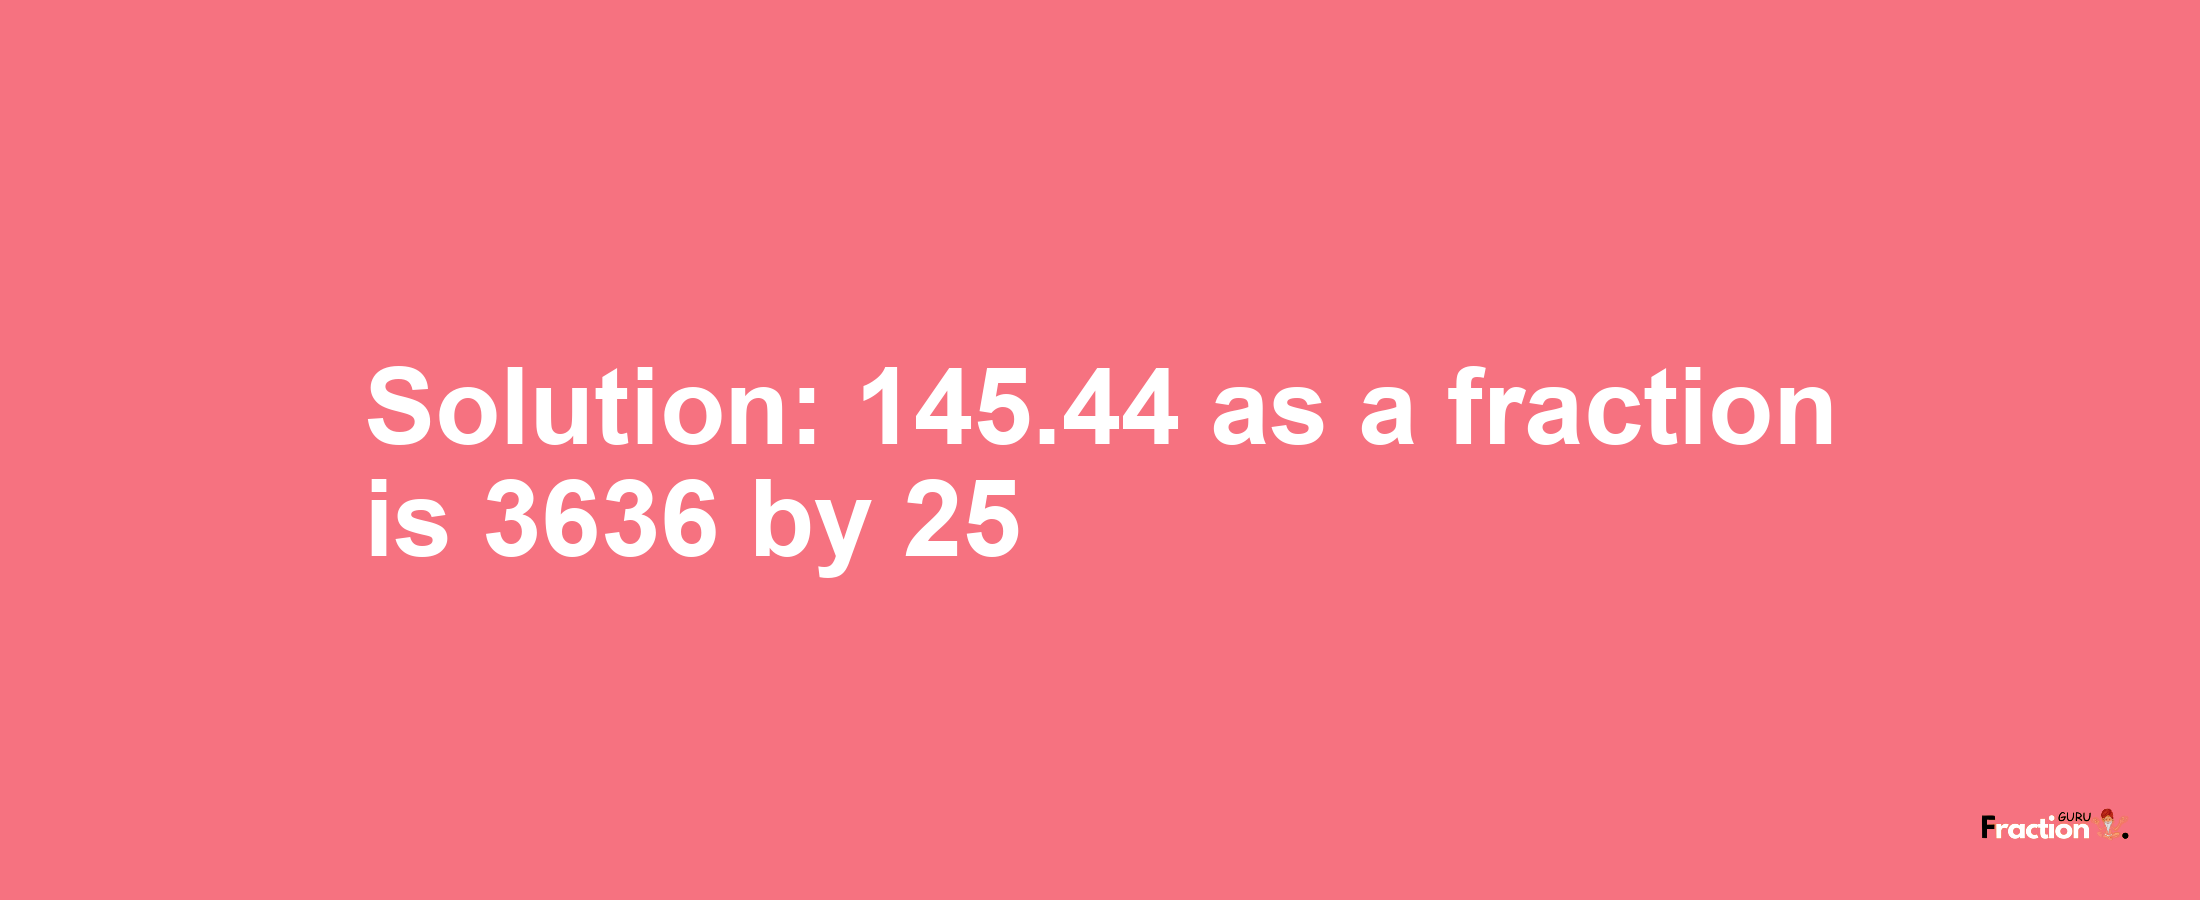 Solution:145.44 as a fraction is 3636/25